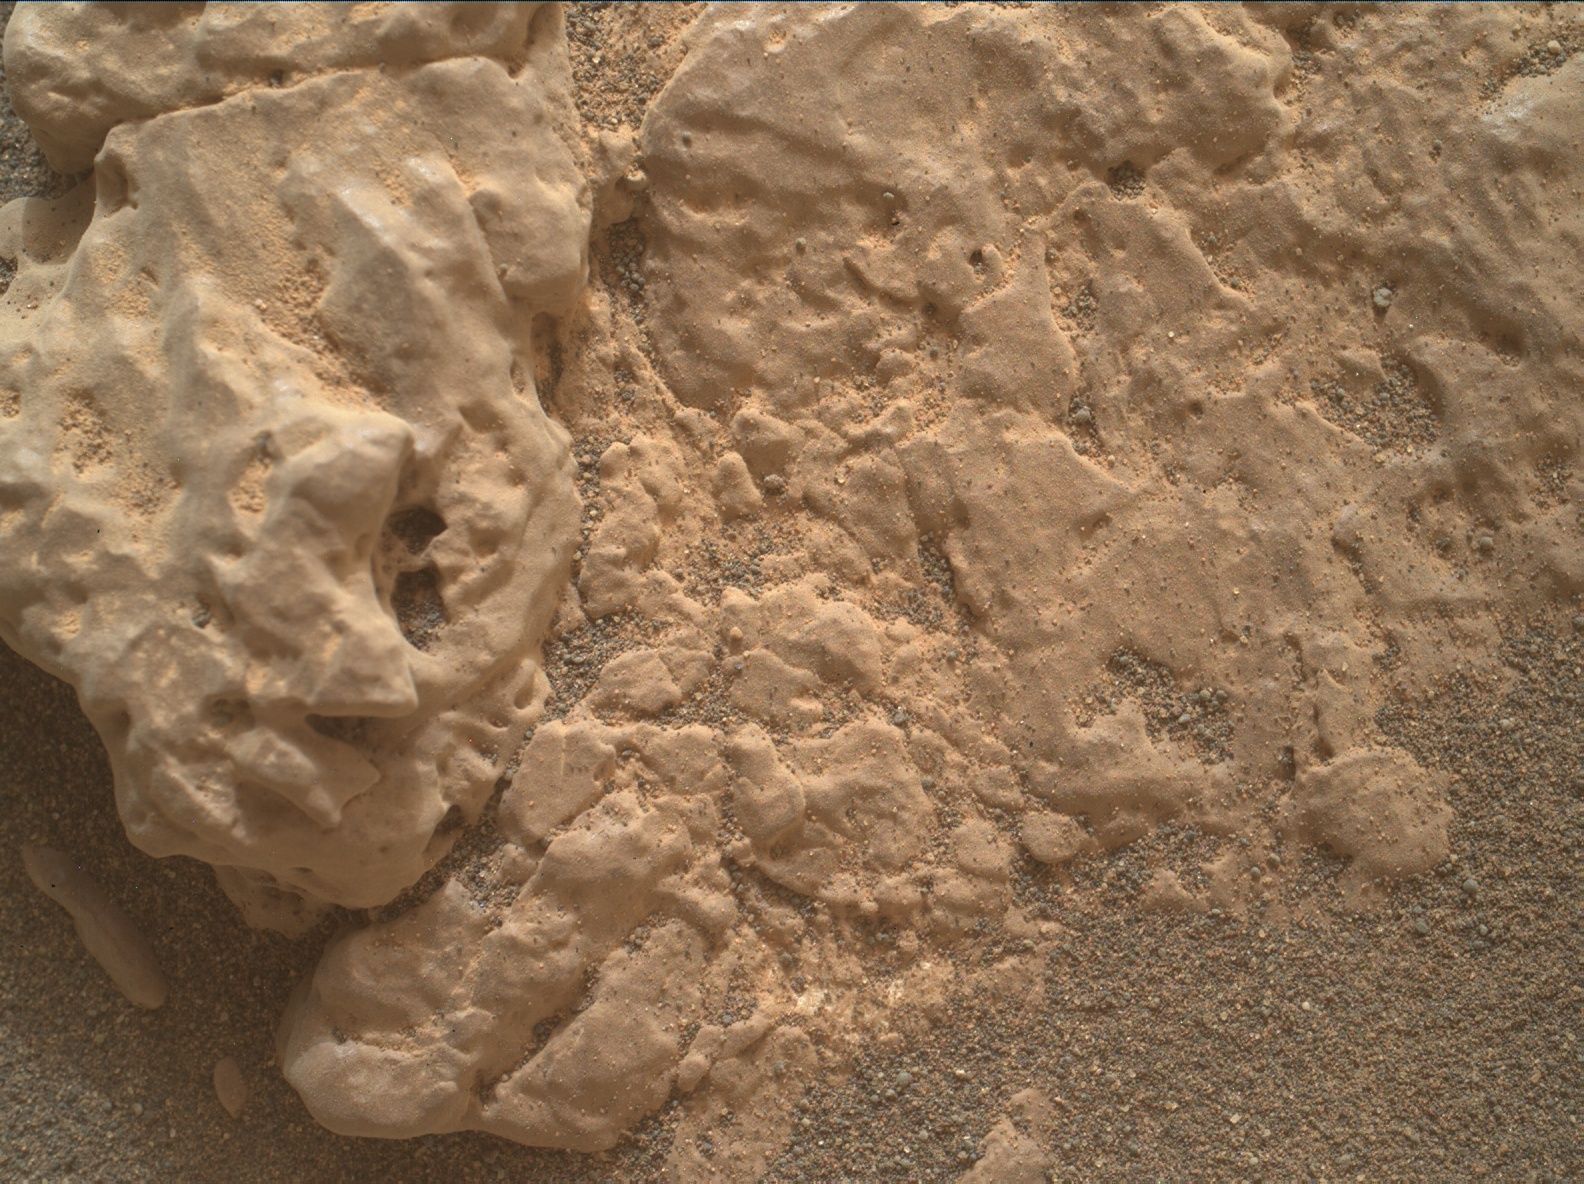 Nasa's Mars rover Curiosity acquired this image using its Mars Hand Lens Imager (MAHLI) on Sol 2315